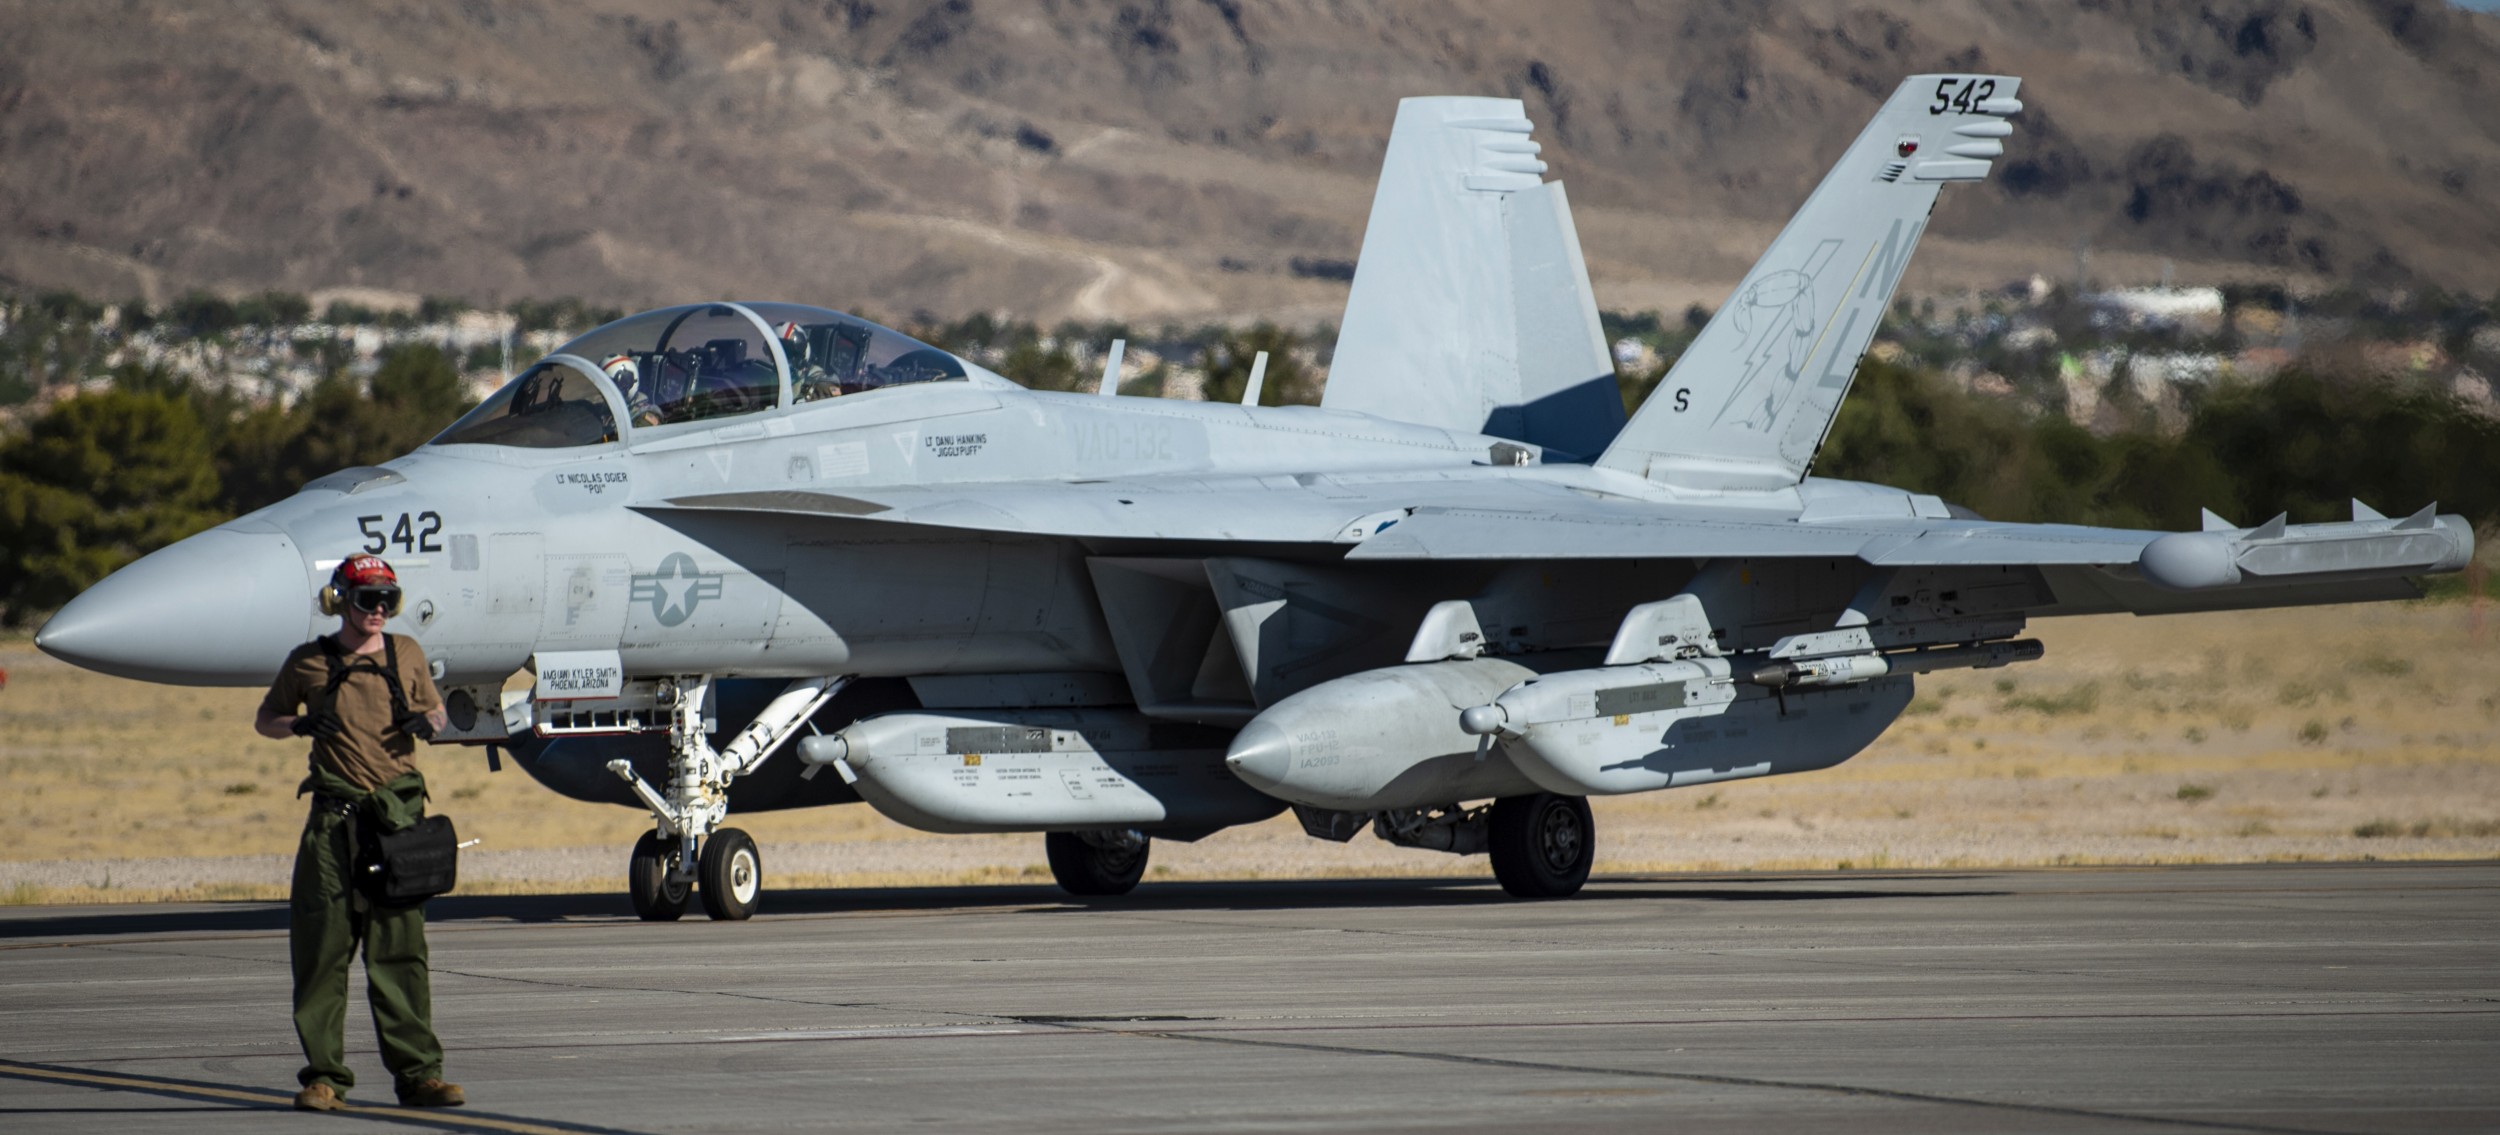 vaq-132 scorpions electronic attack squadron vaqron us navy boeing ea-18g growler exercise red flag 20-3 nellis afb nevada 75